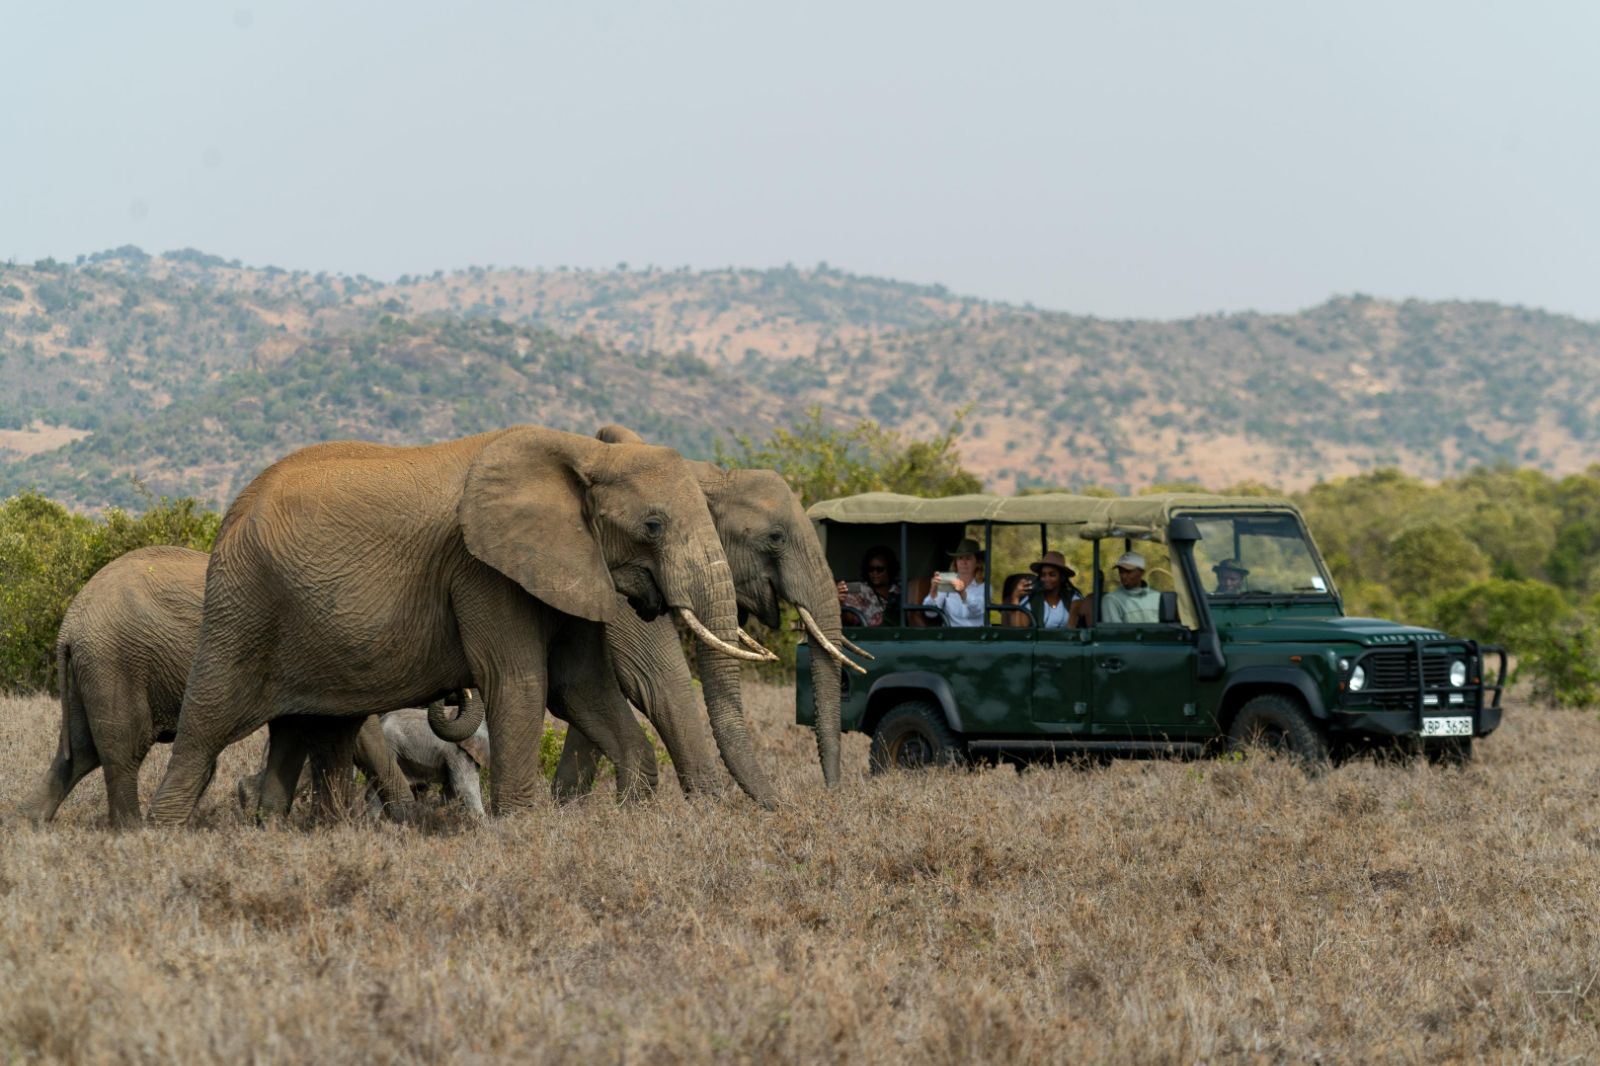 Elephants spotted on a game drive on the grounds of Laragai House on the Borana Conservancy in Kenya